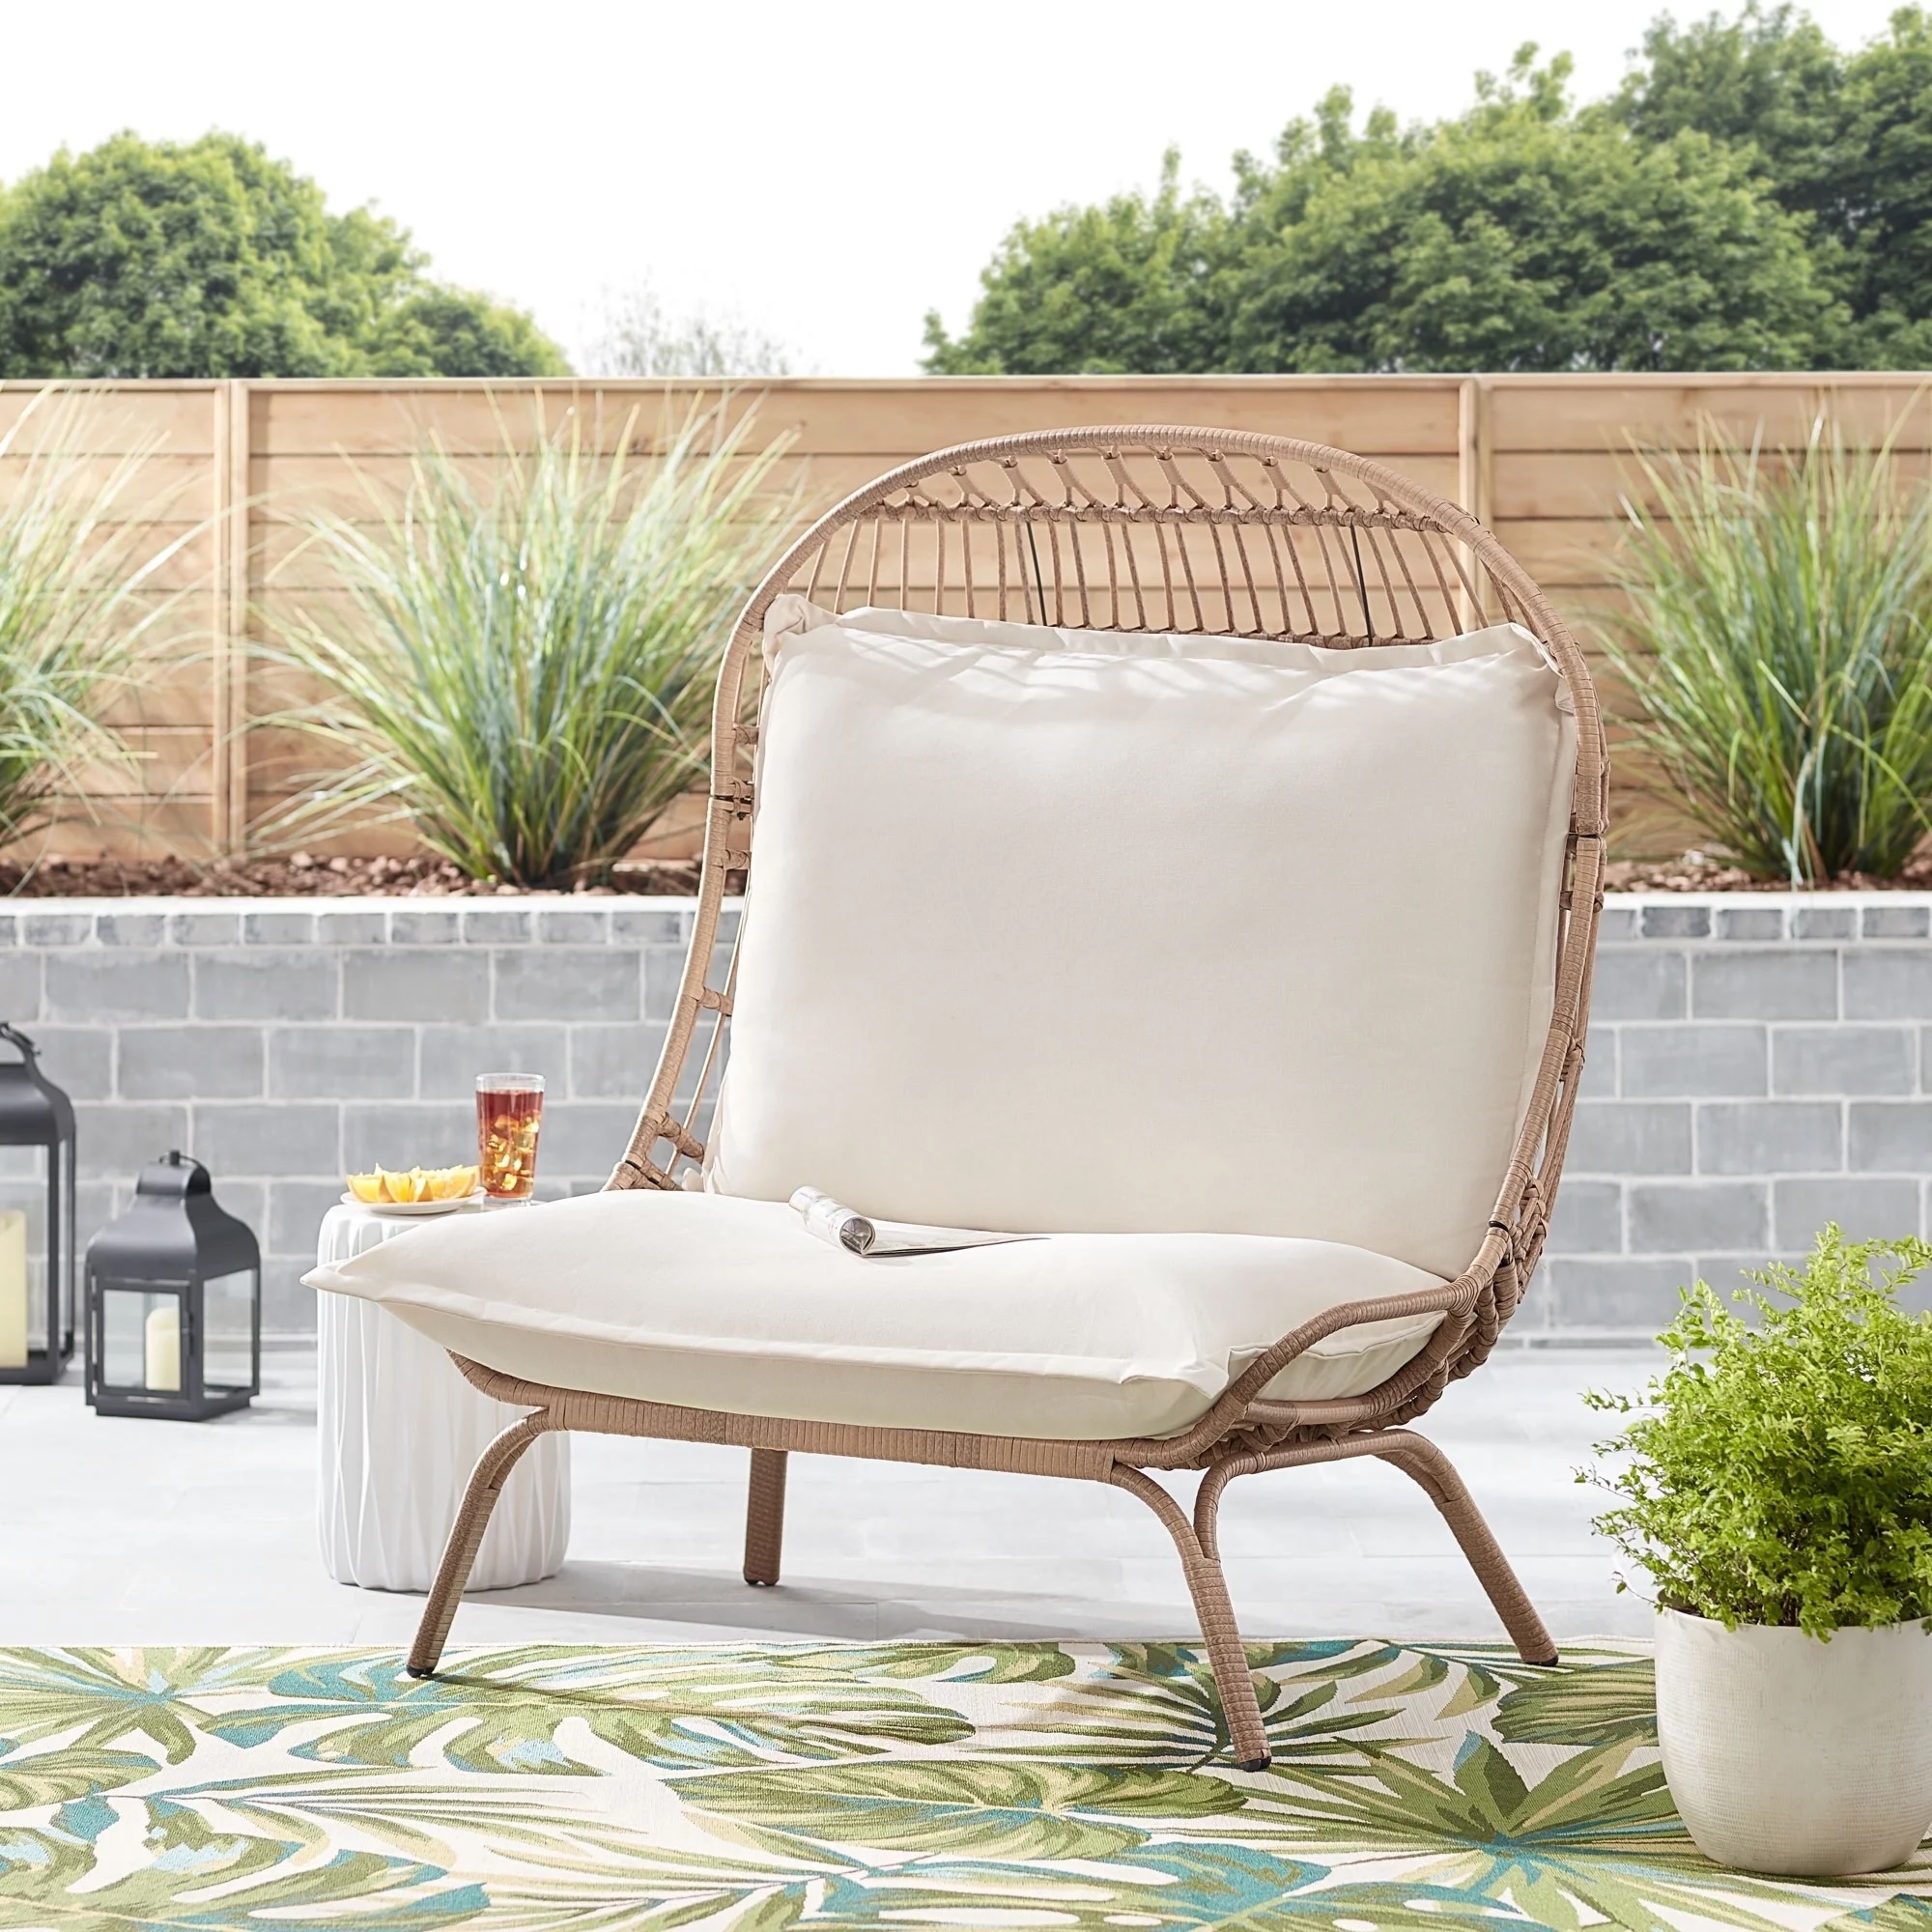 brown wicker patio with white cushions outdoors